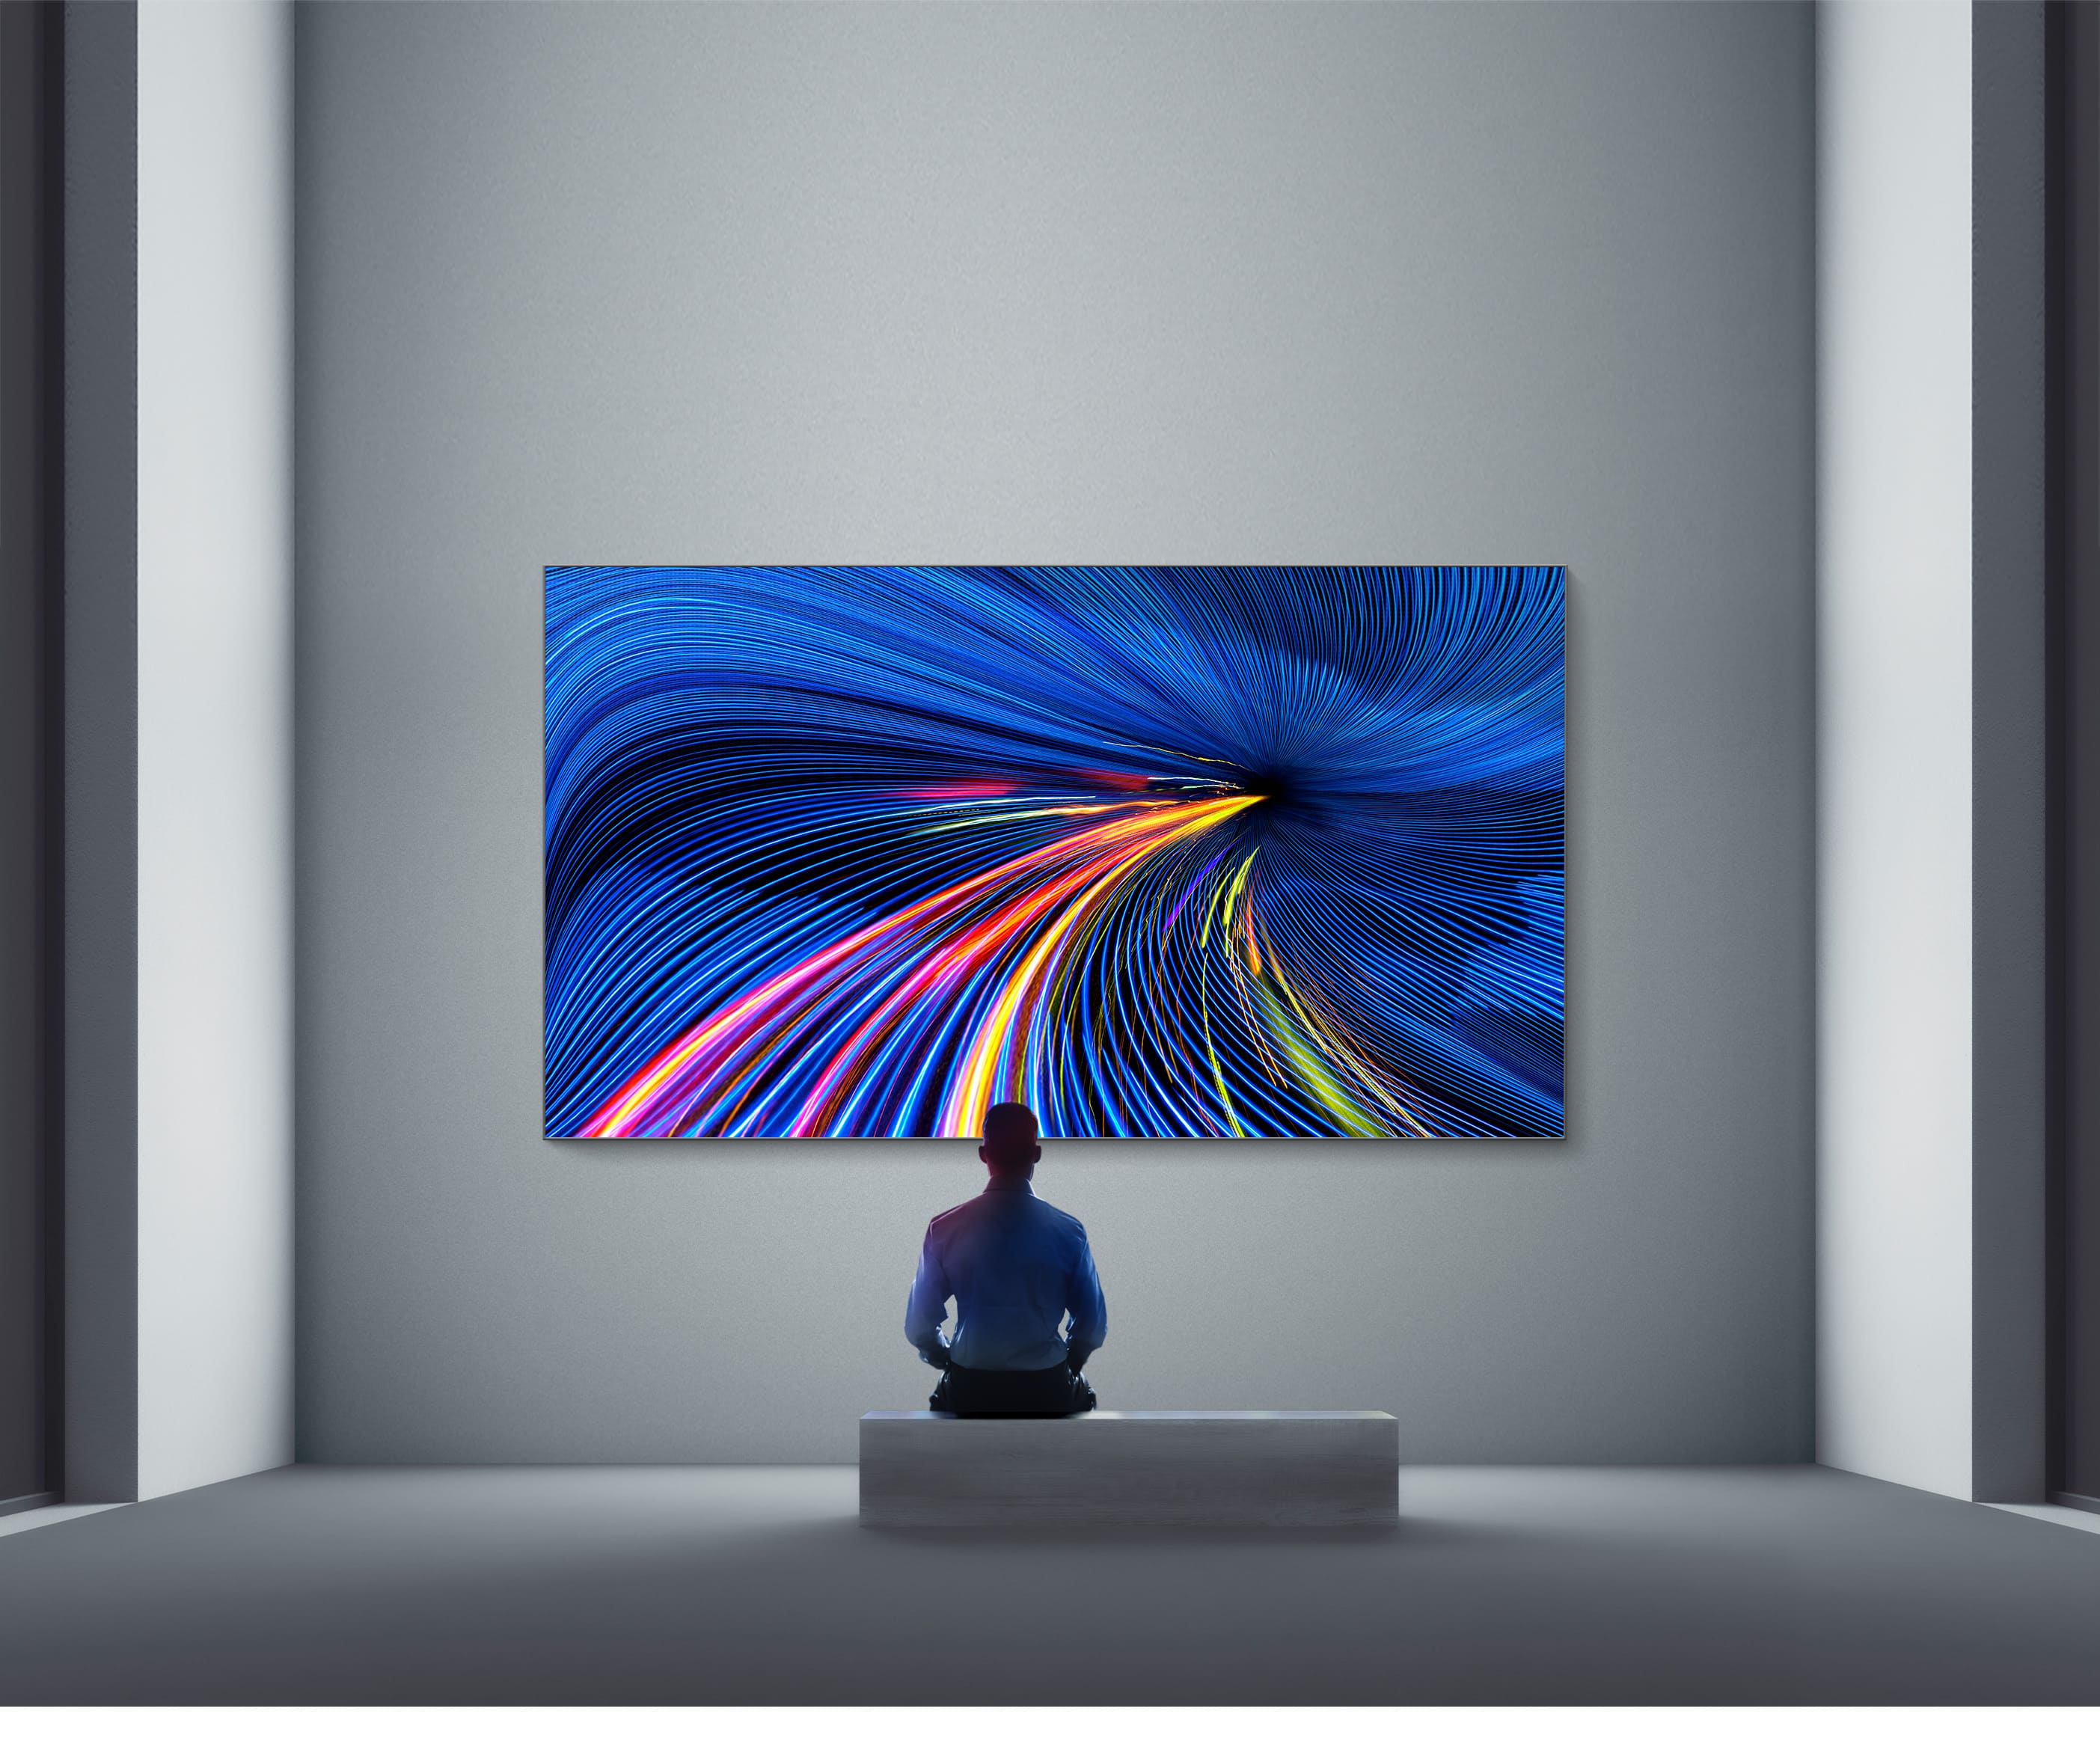 Samsung The Wall All-in-One IA008B - 146 inch LED Wall - 0.84 mm PP - 500 cd/m² - 4K - 3840 x 2160 - LED Display